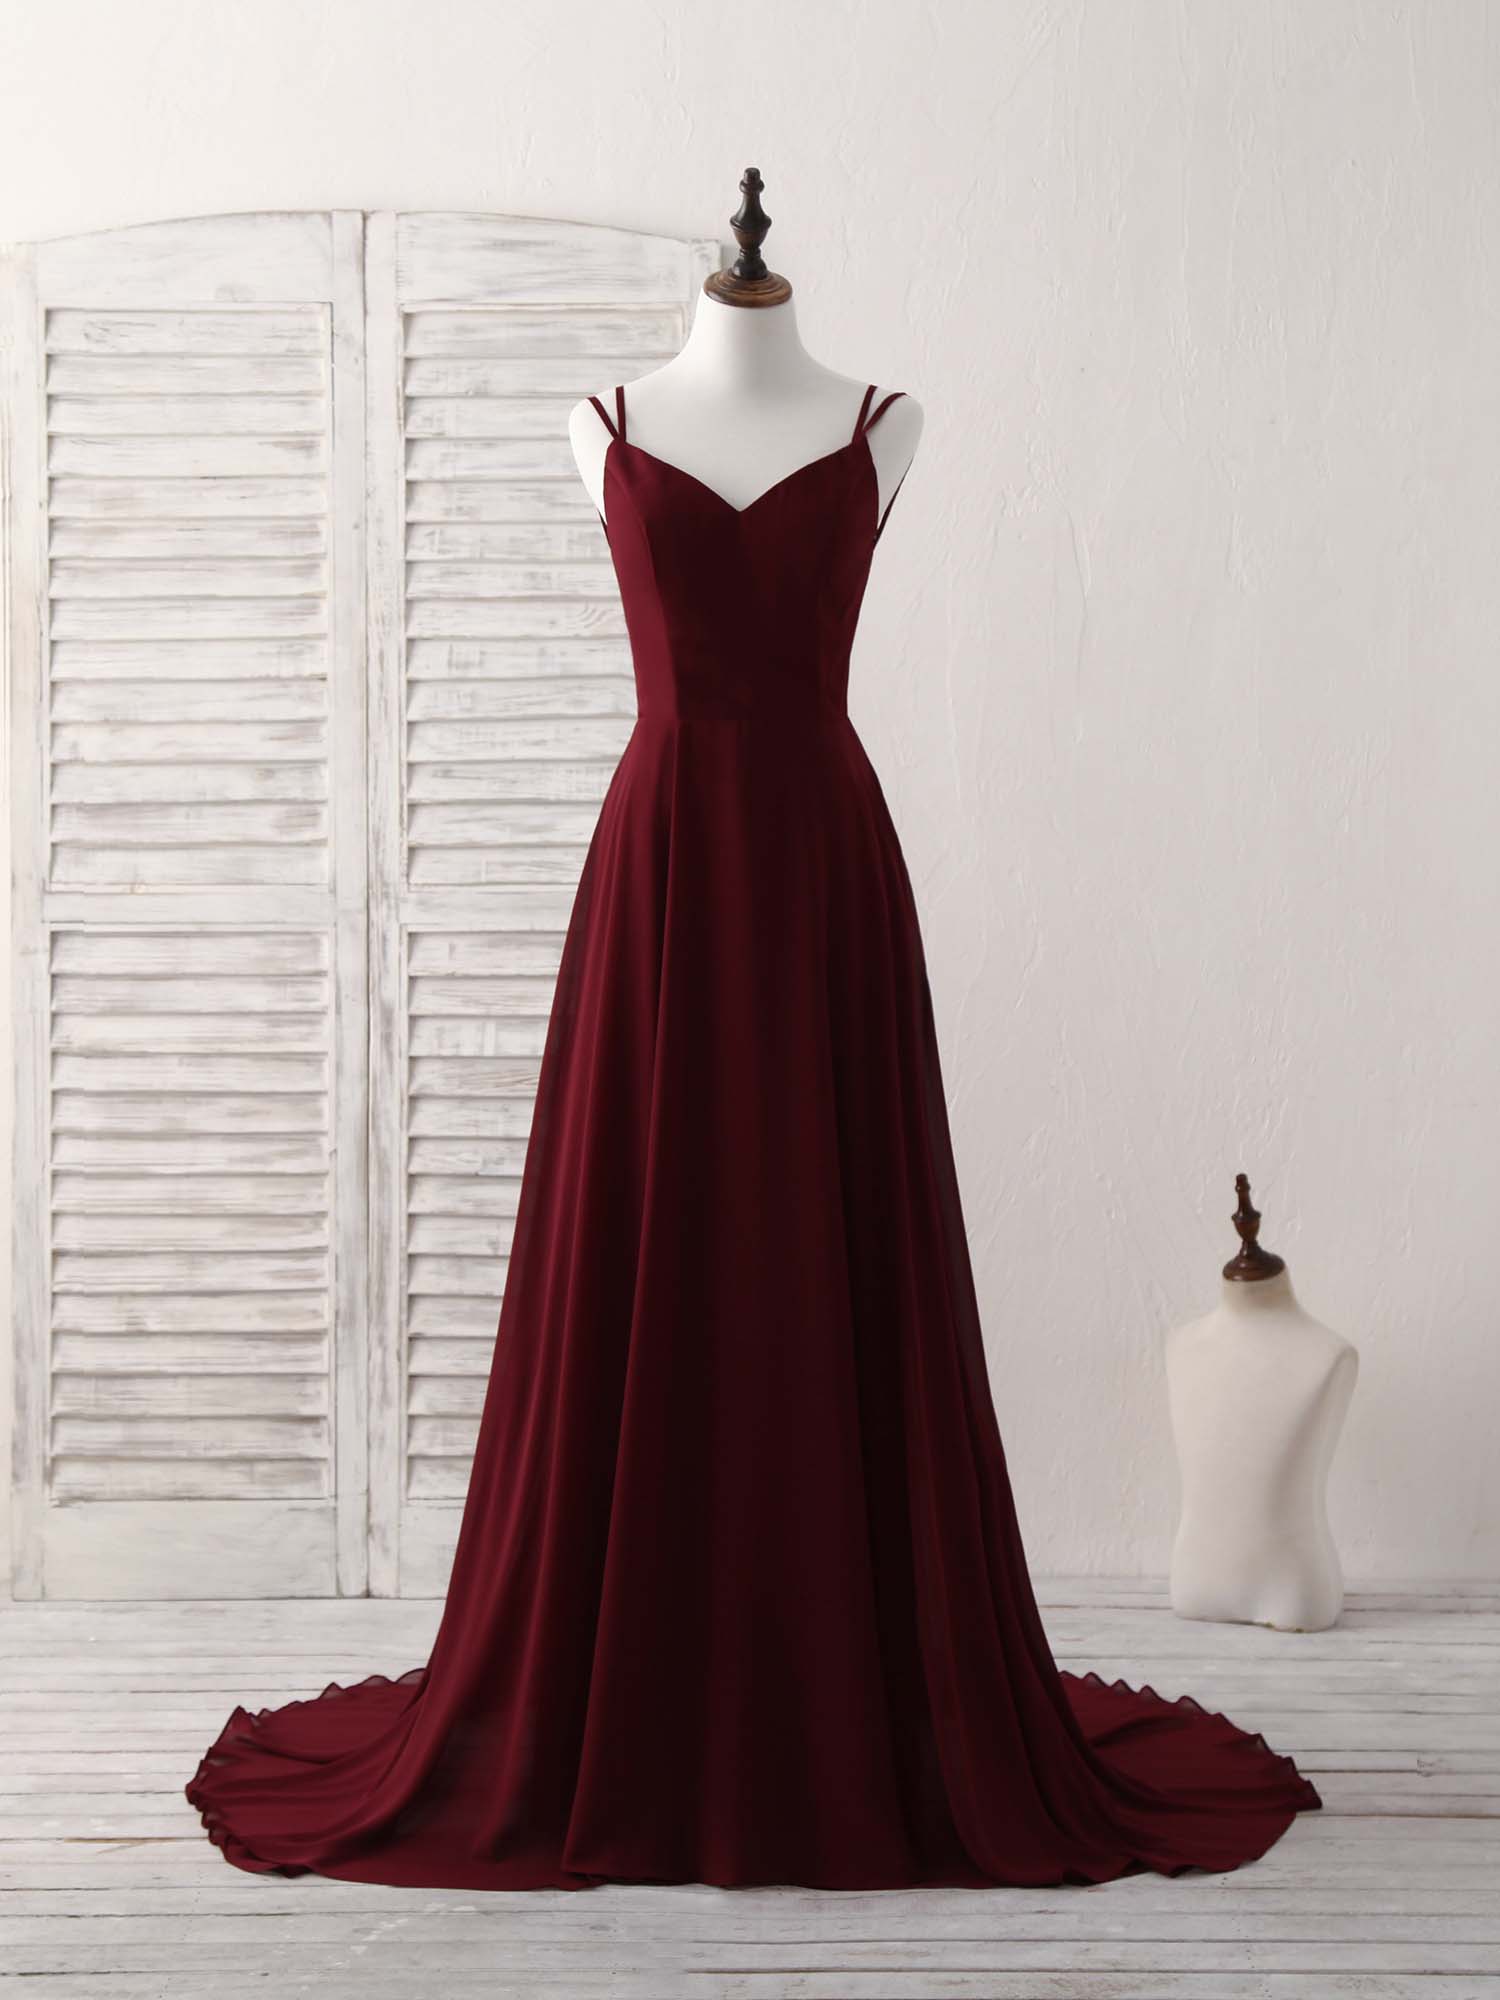 Simple Burgundy Chiffon Long Prom Dress Outfits For Women Backless Evening Dress